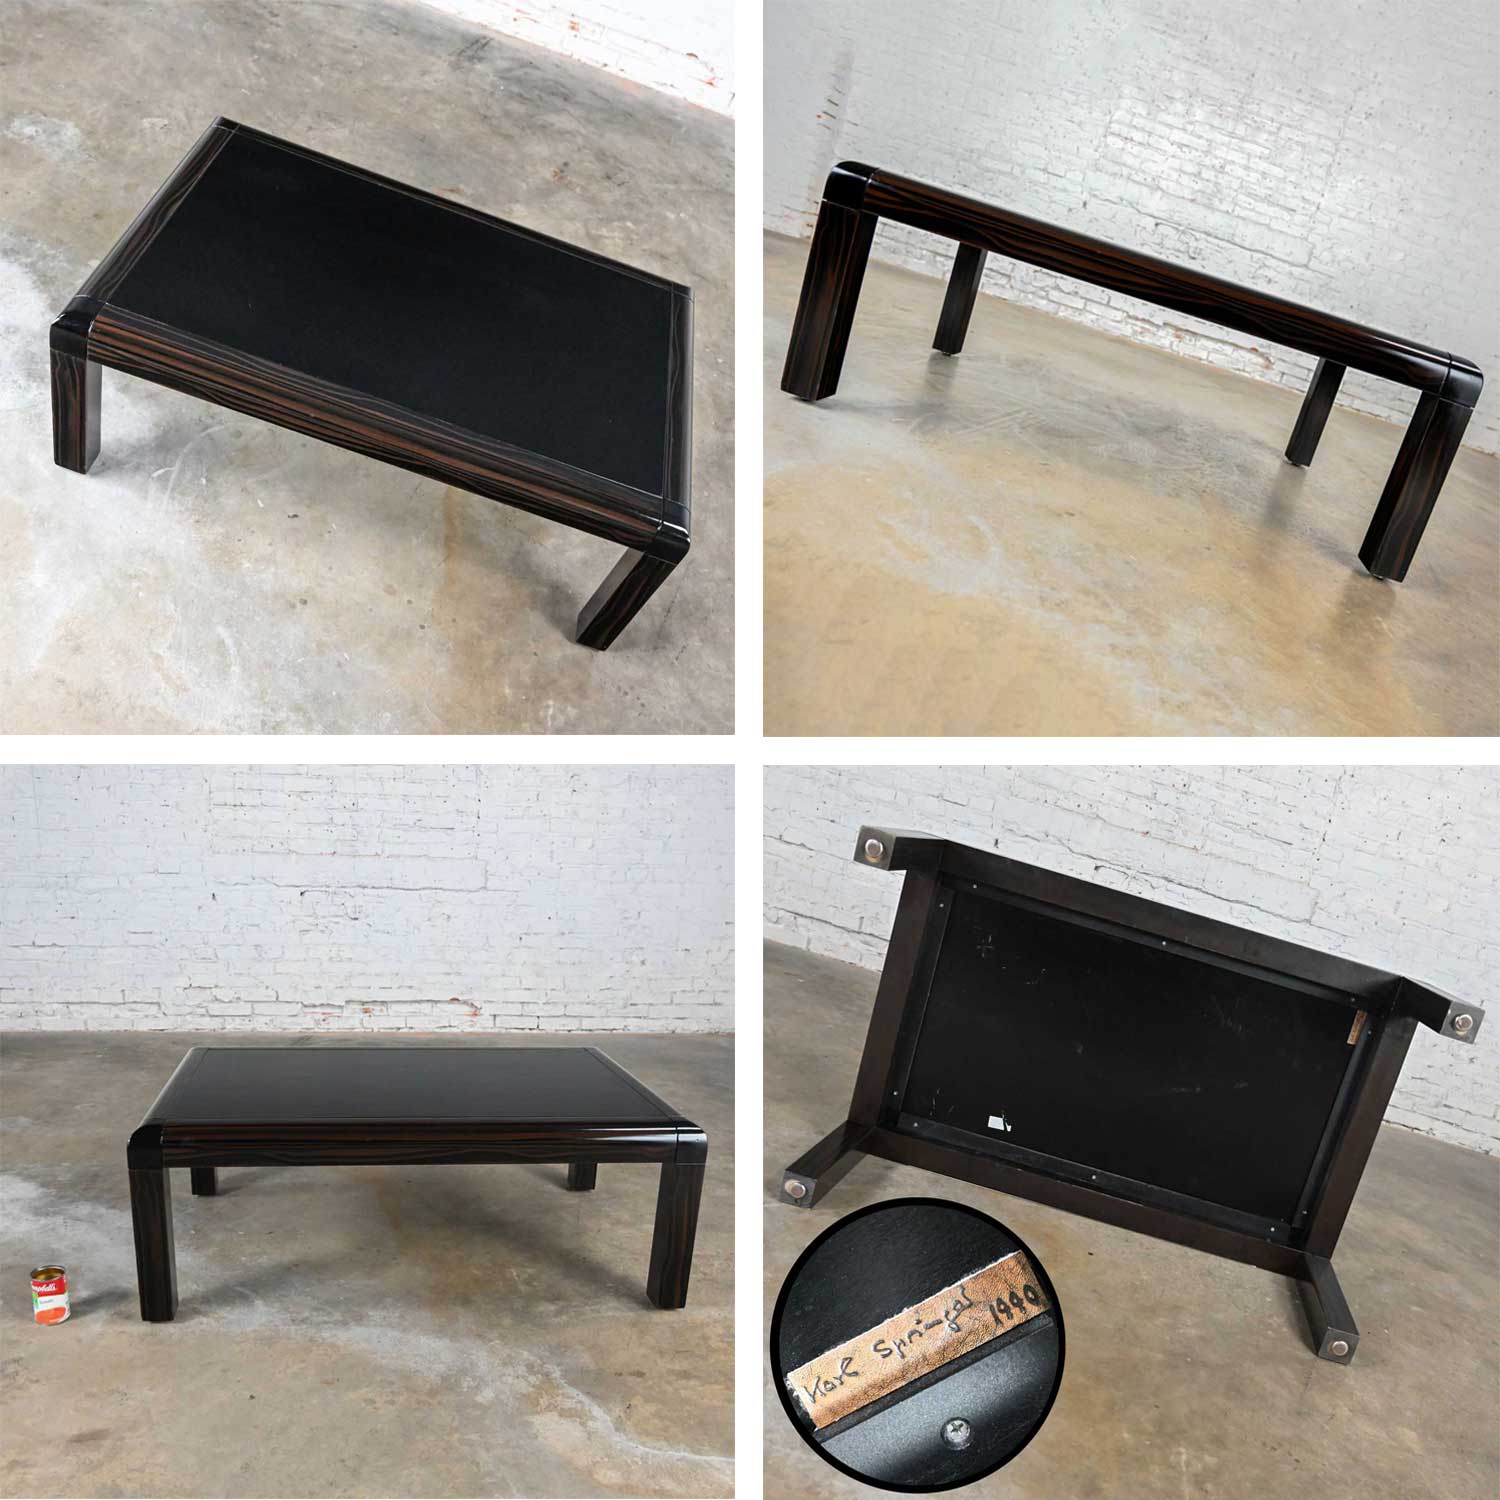 Vintage Modern Coffee Table Black & Faux Finish Lacquer with Black Leather Top Signed by Karl Springer